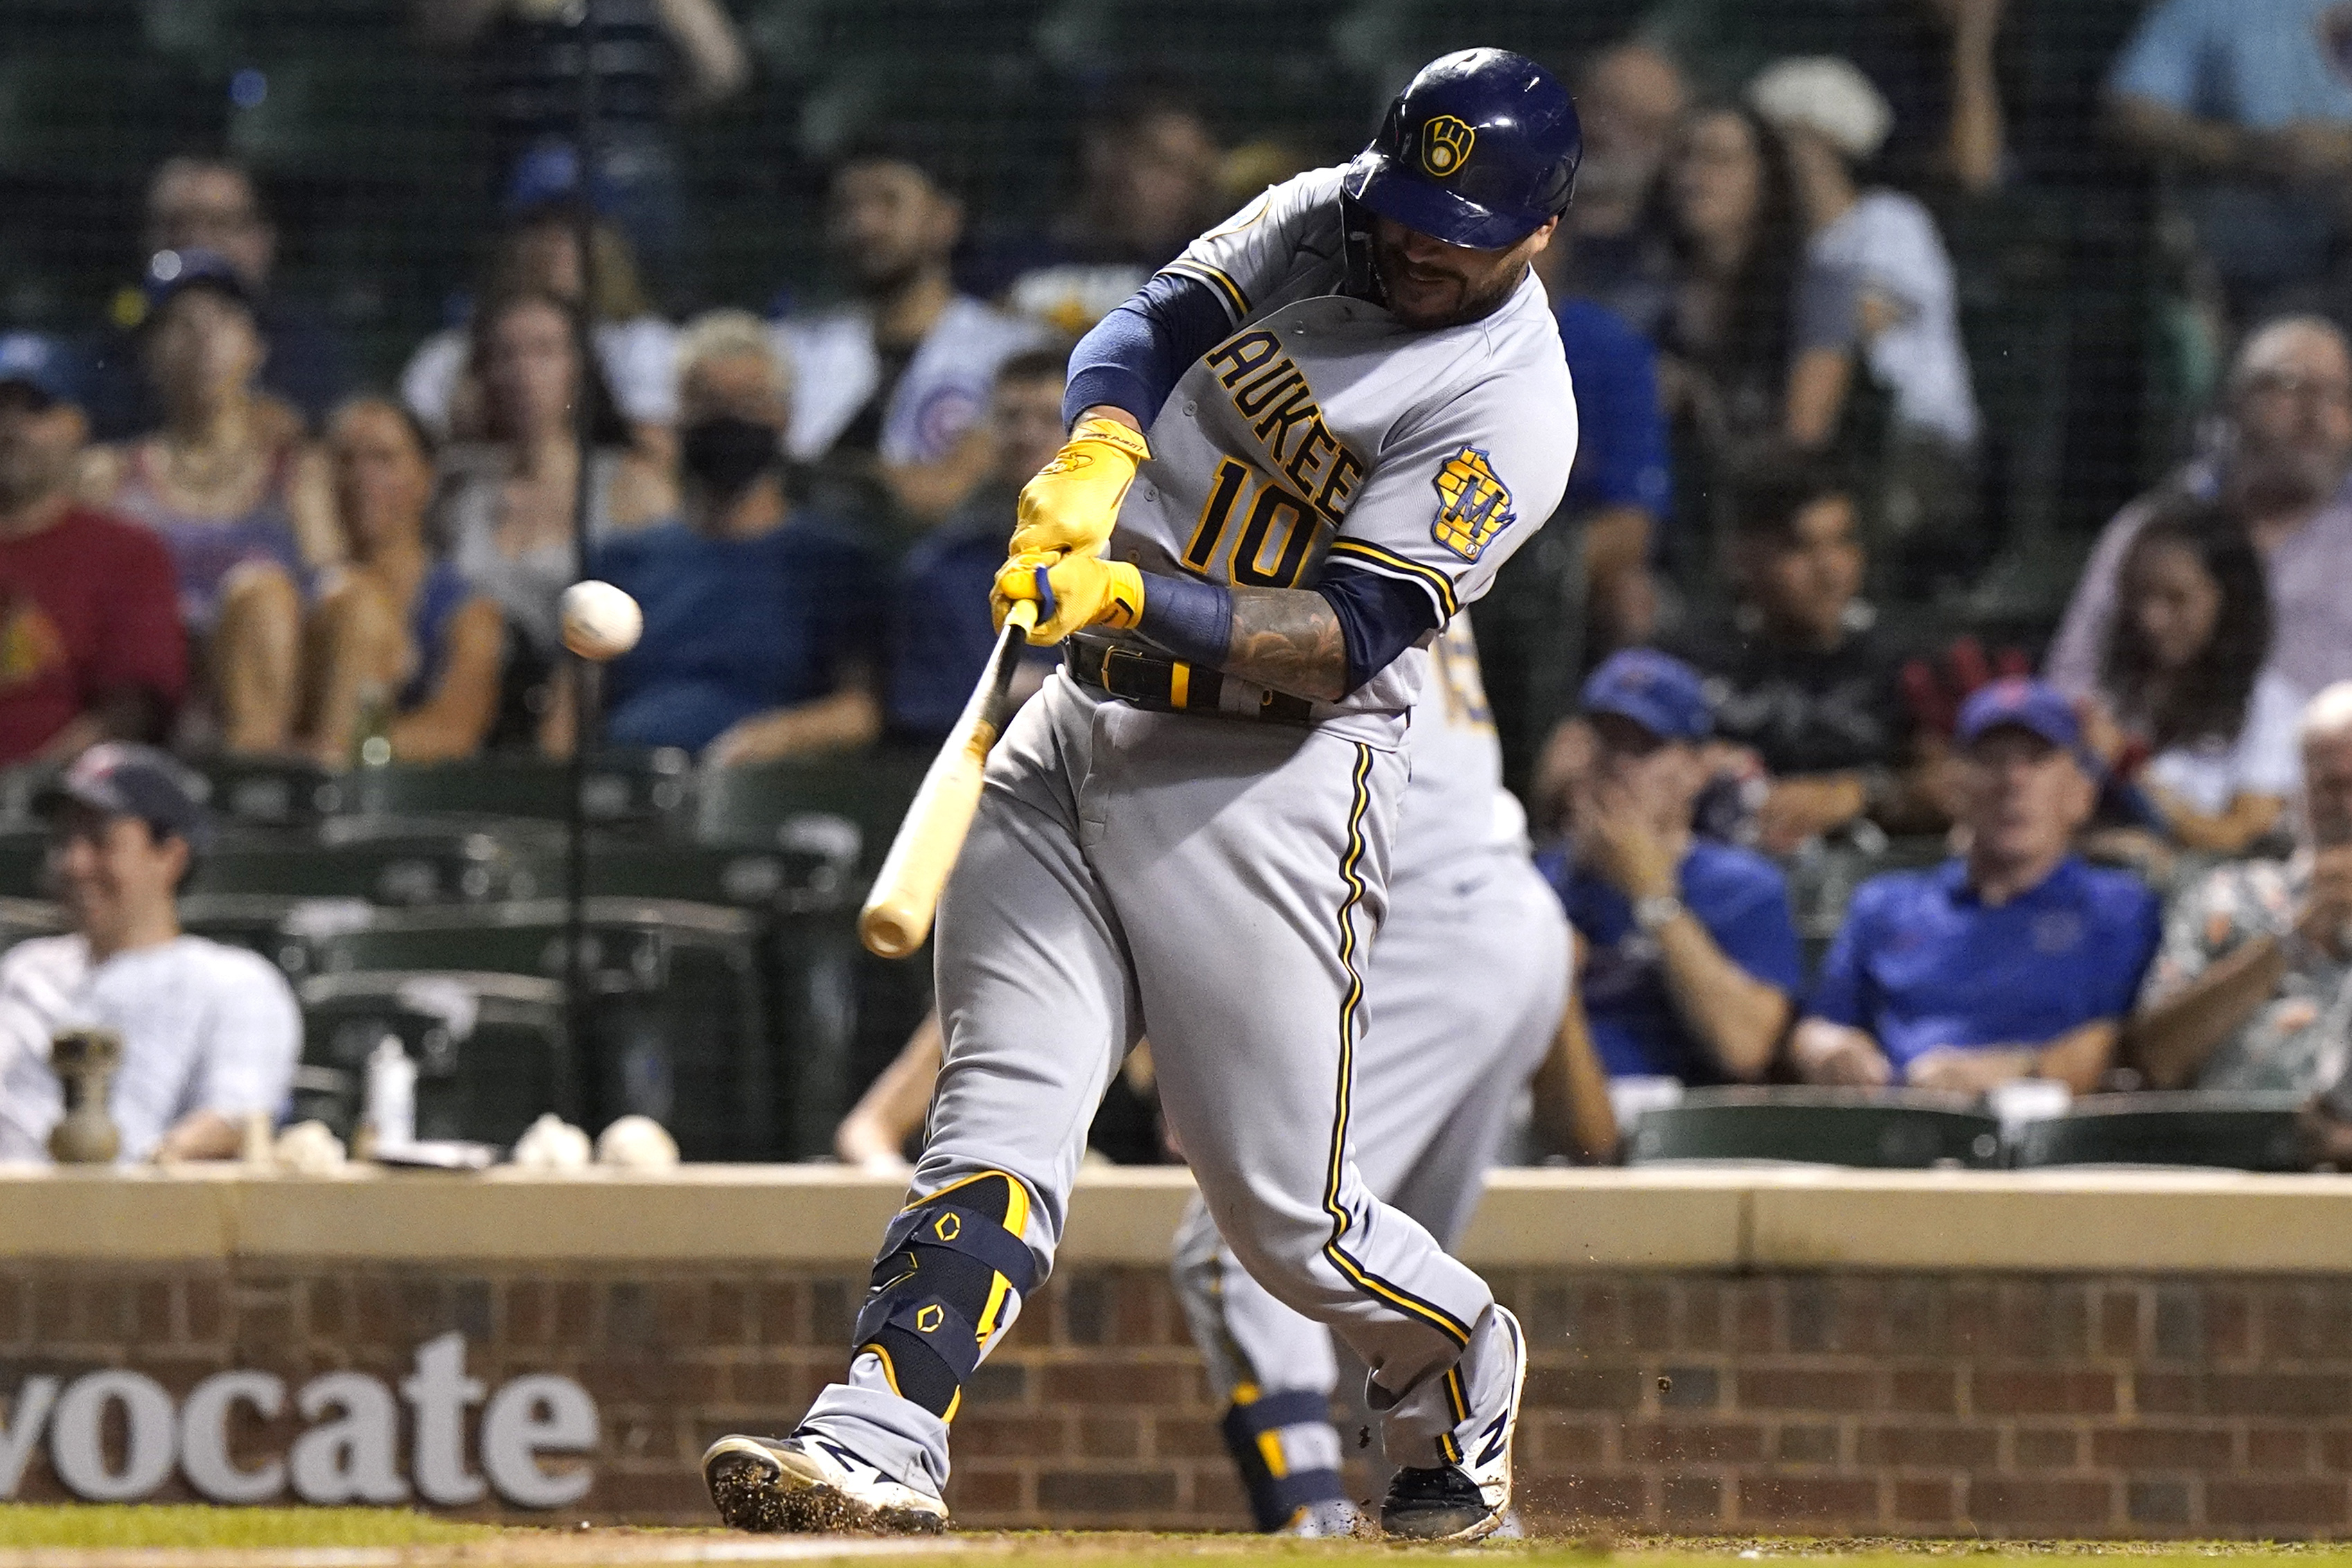 Burnes fans 10 straight to tie record, Brewers rip Cubs 10-0